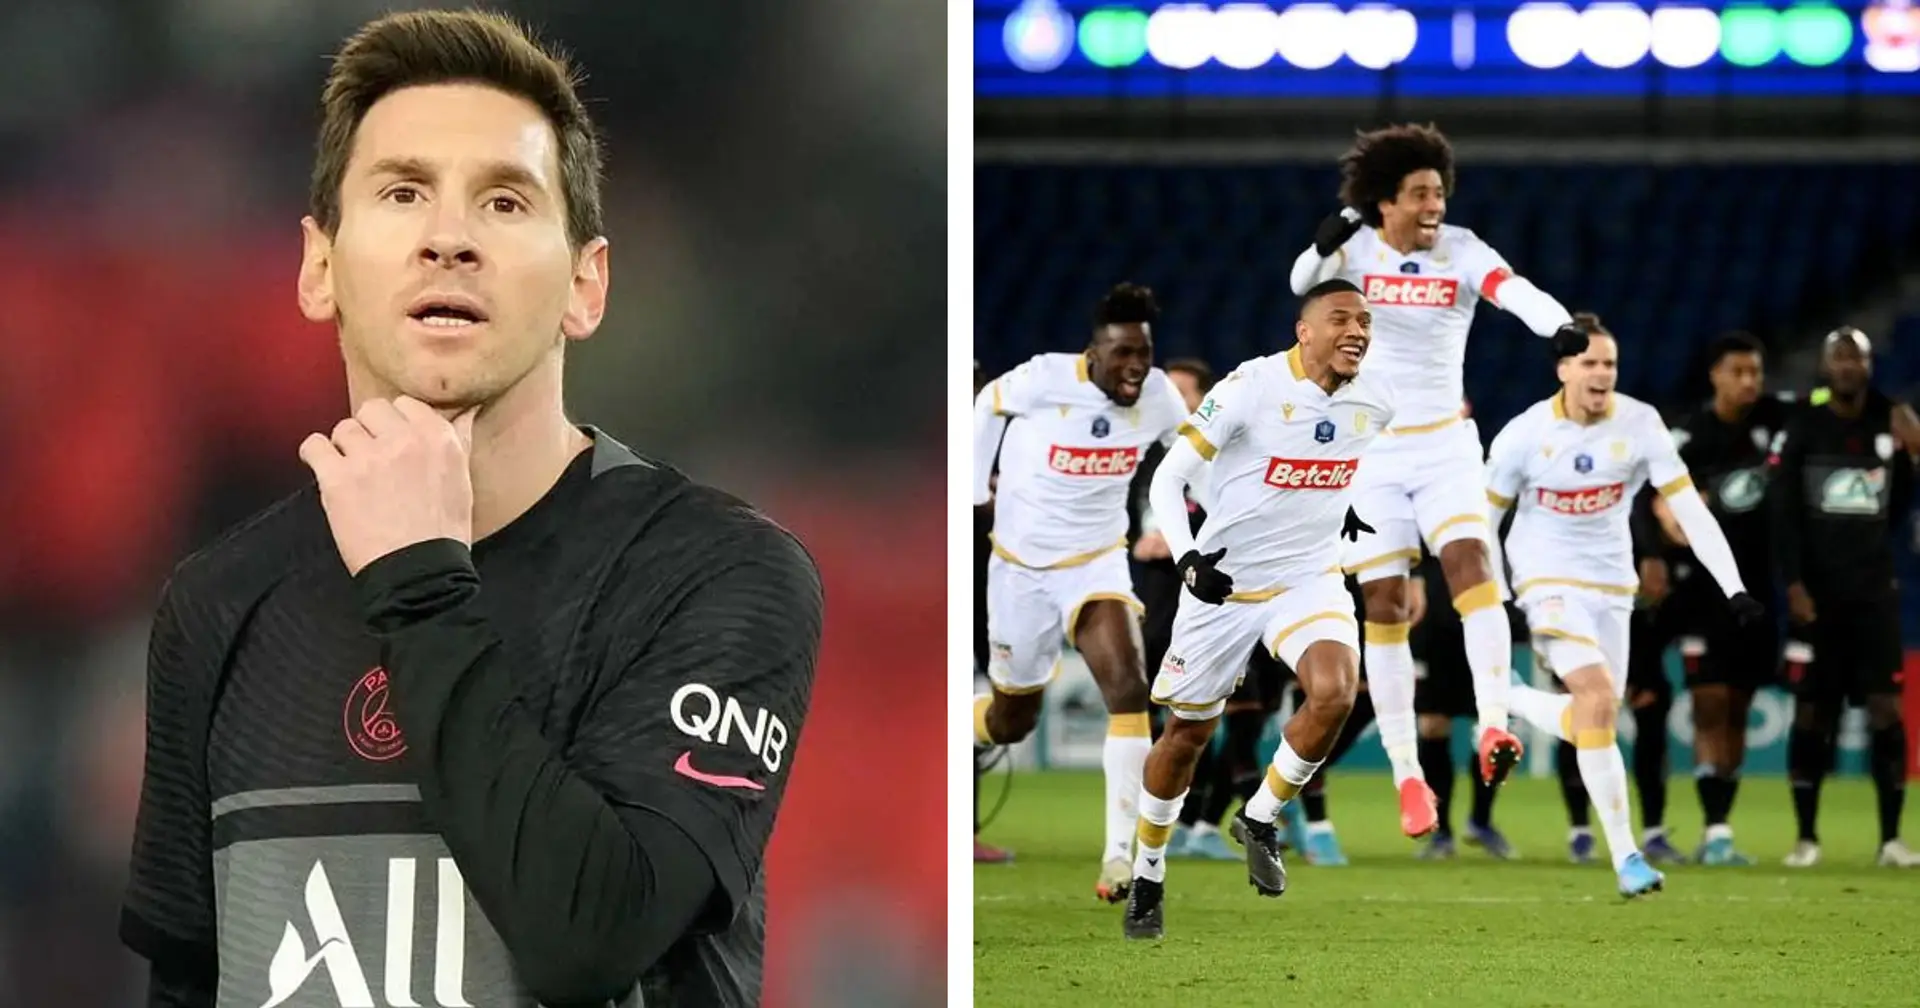 Leo Messi's impressive penalty shootout record ends with PSG's loss to Nice